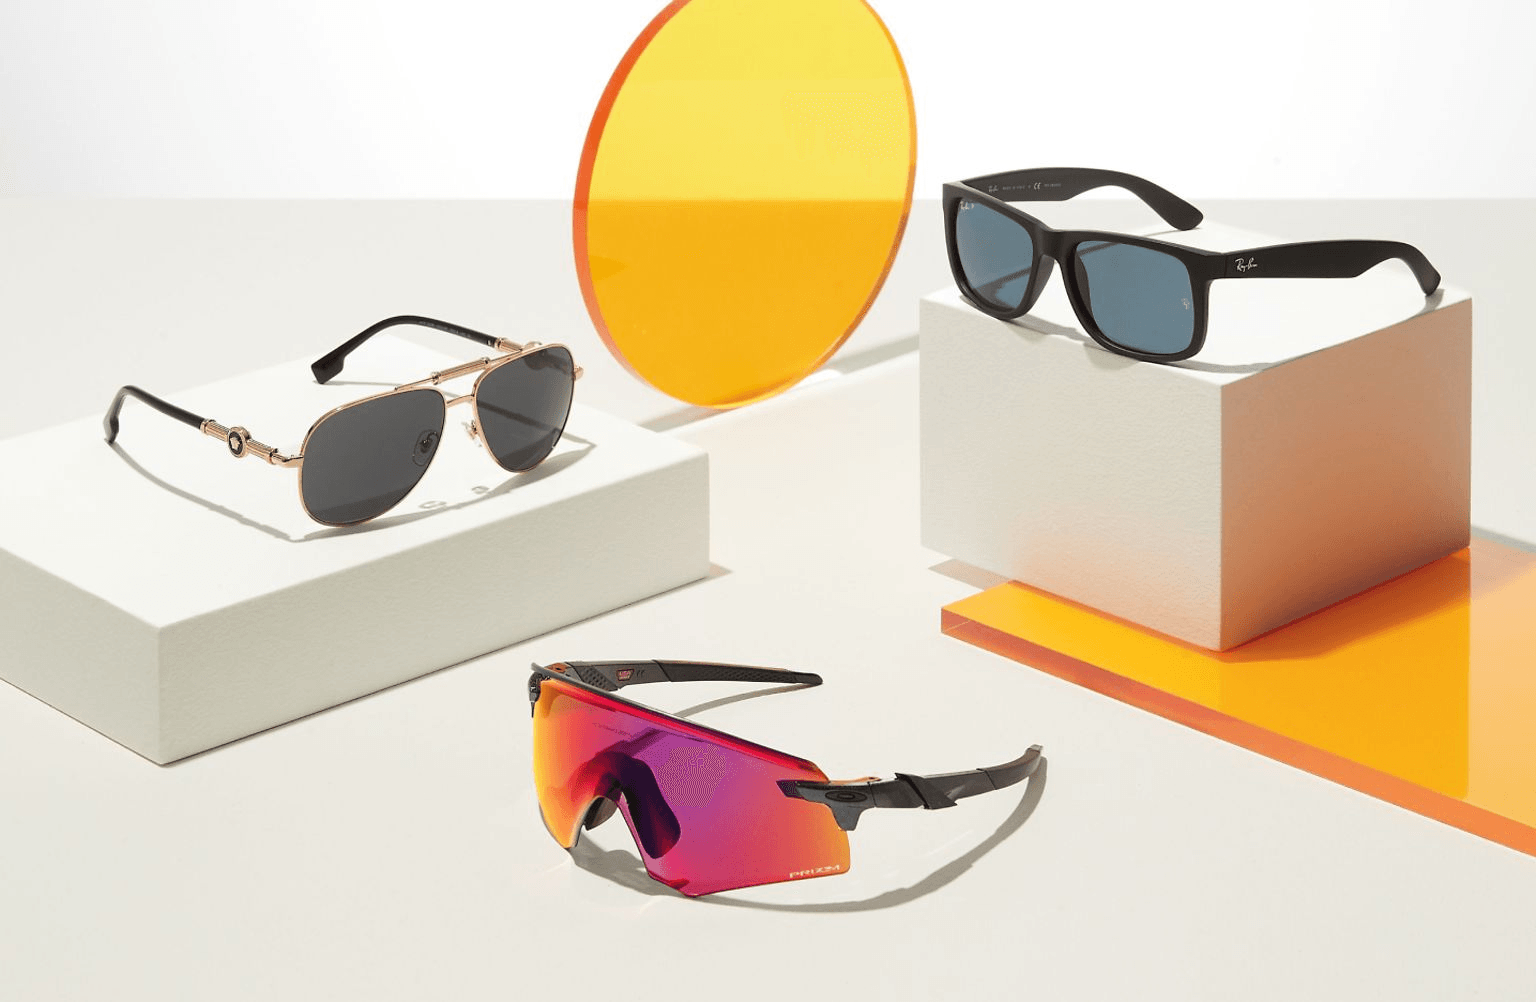 Teachers and students get exclusive discounts on eyewear from Sunglass Hut.